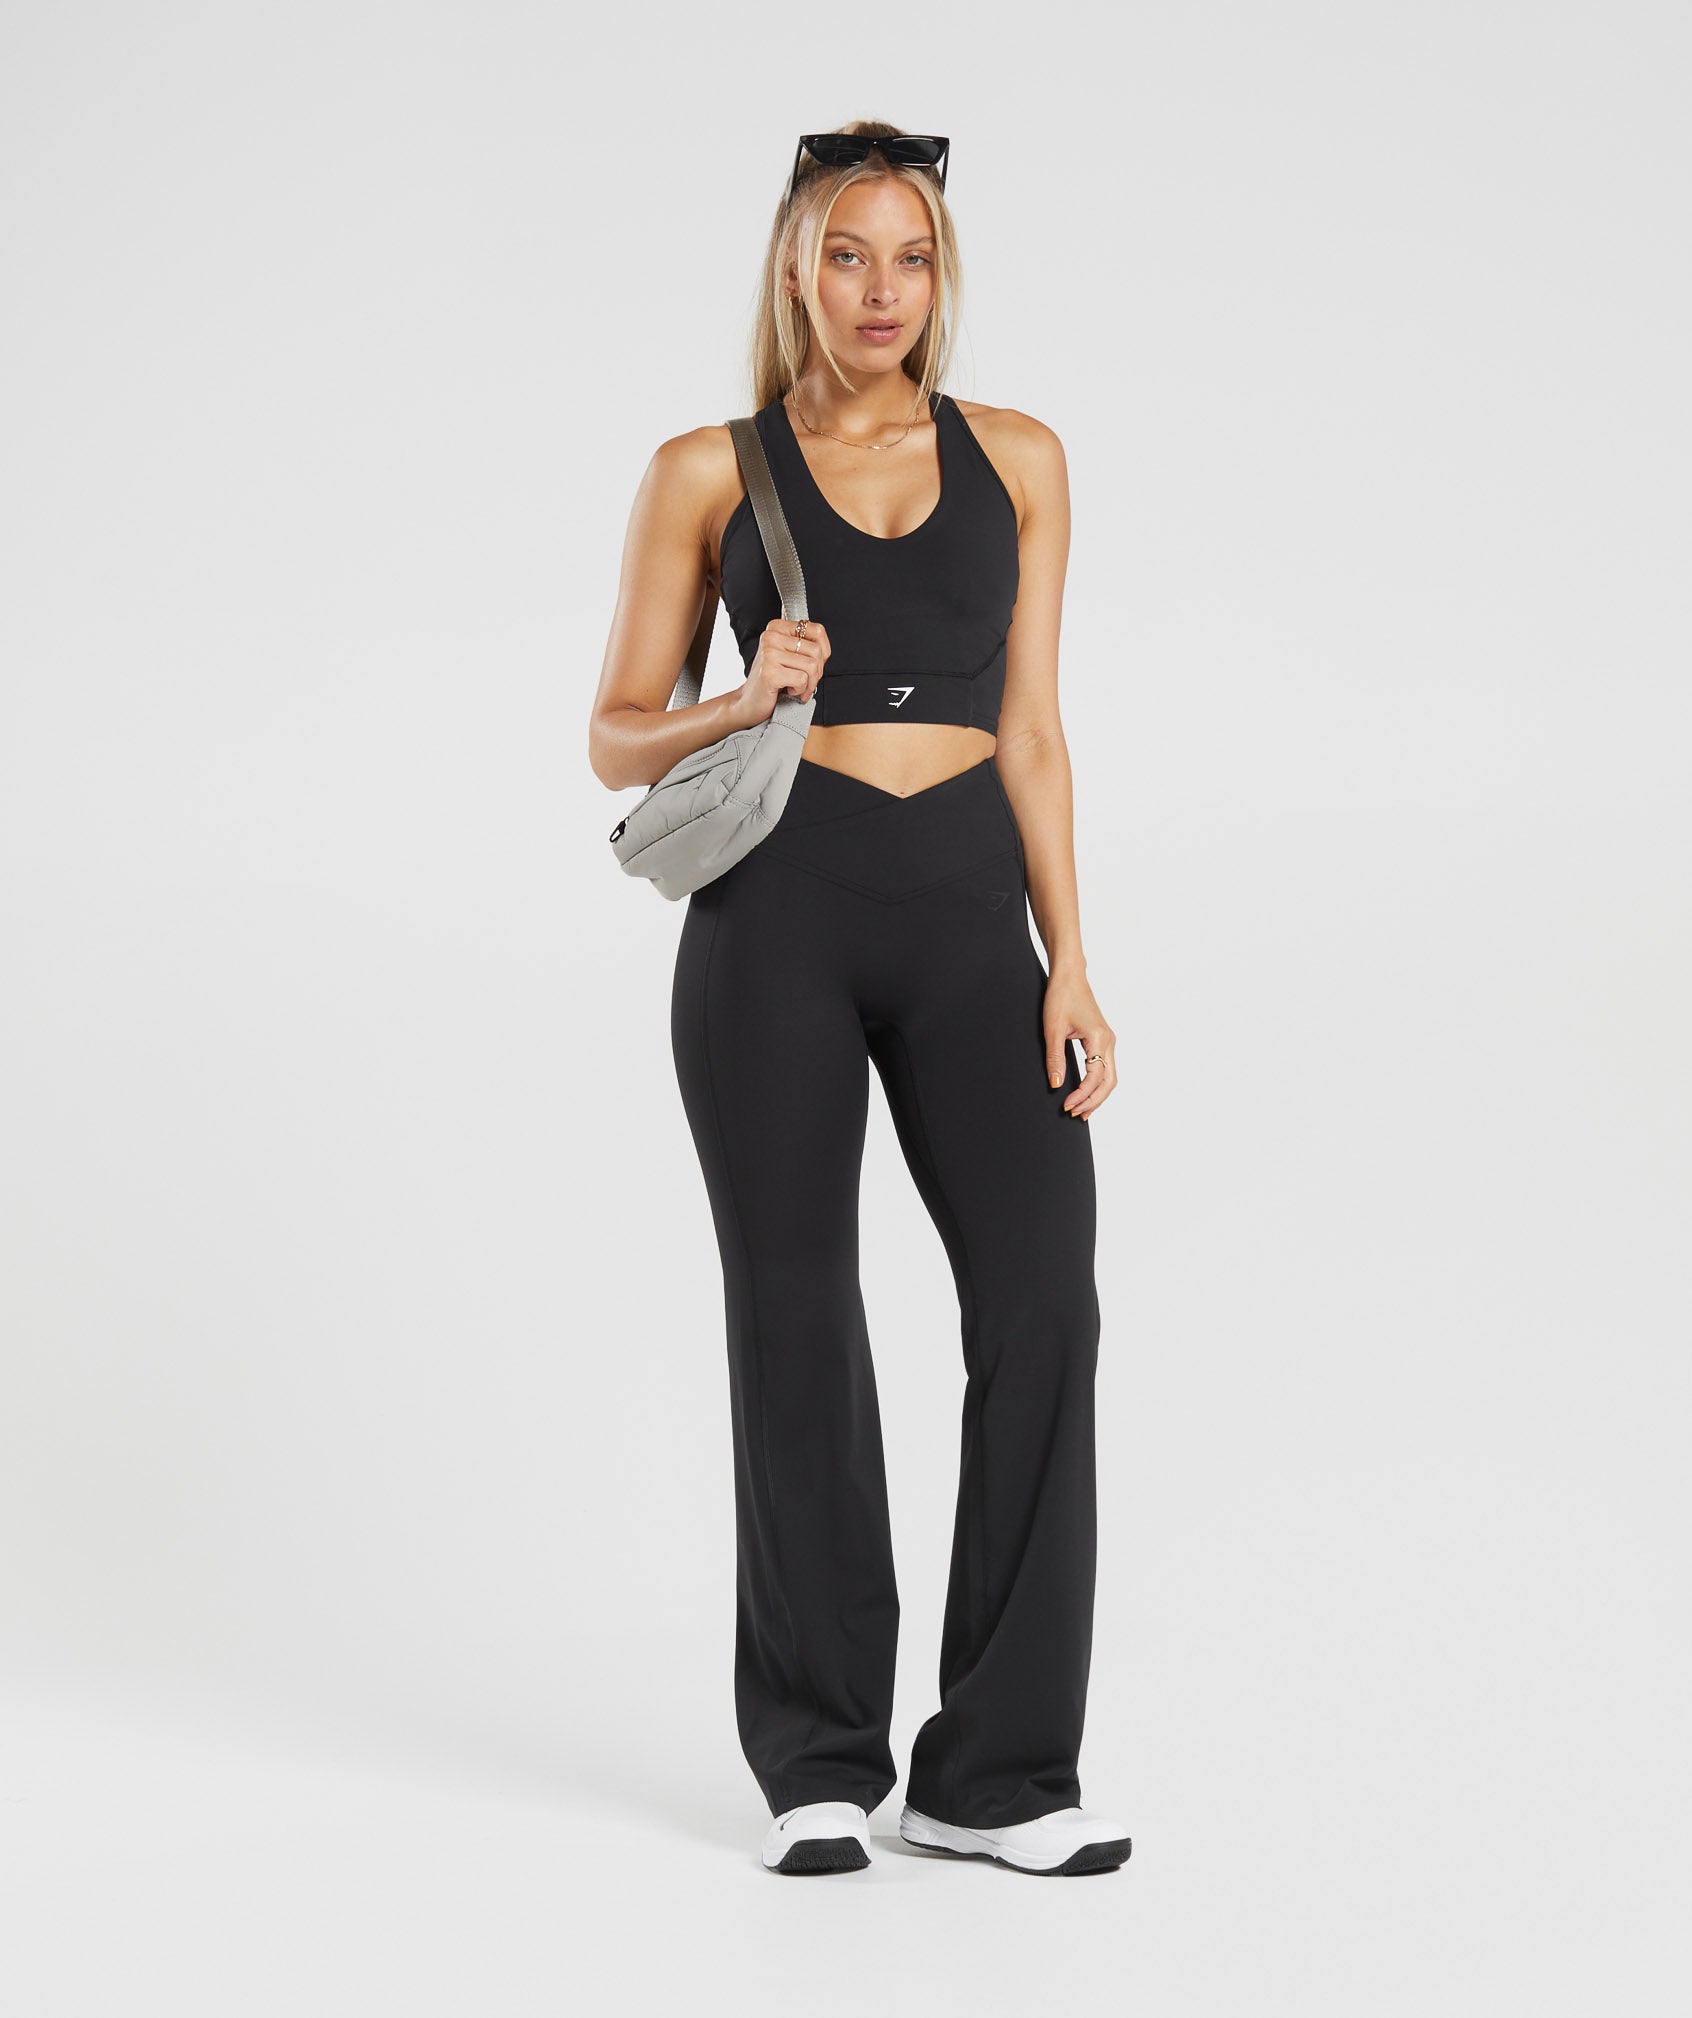 The Women's Basic Crop is one of those Gymshark must-have